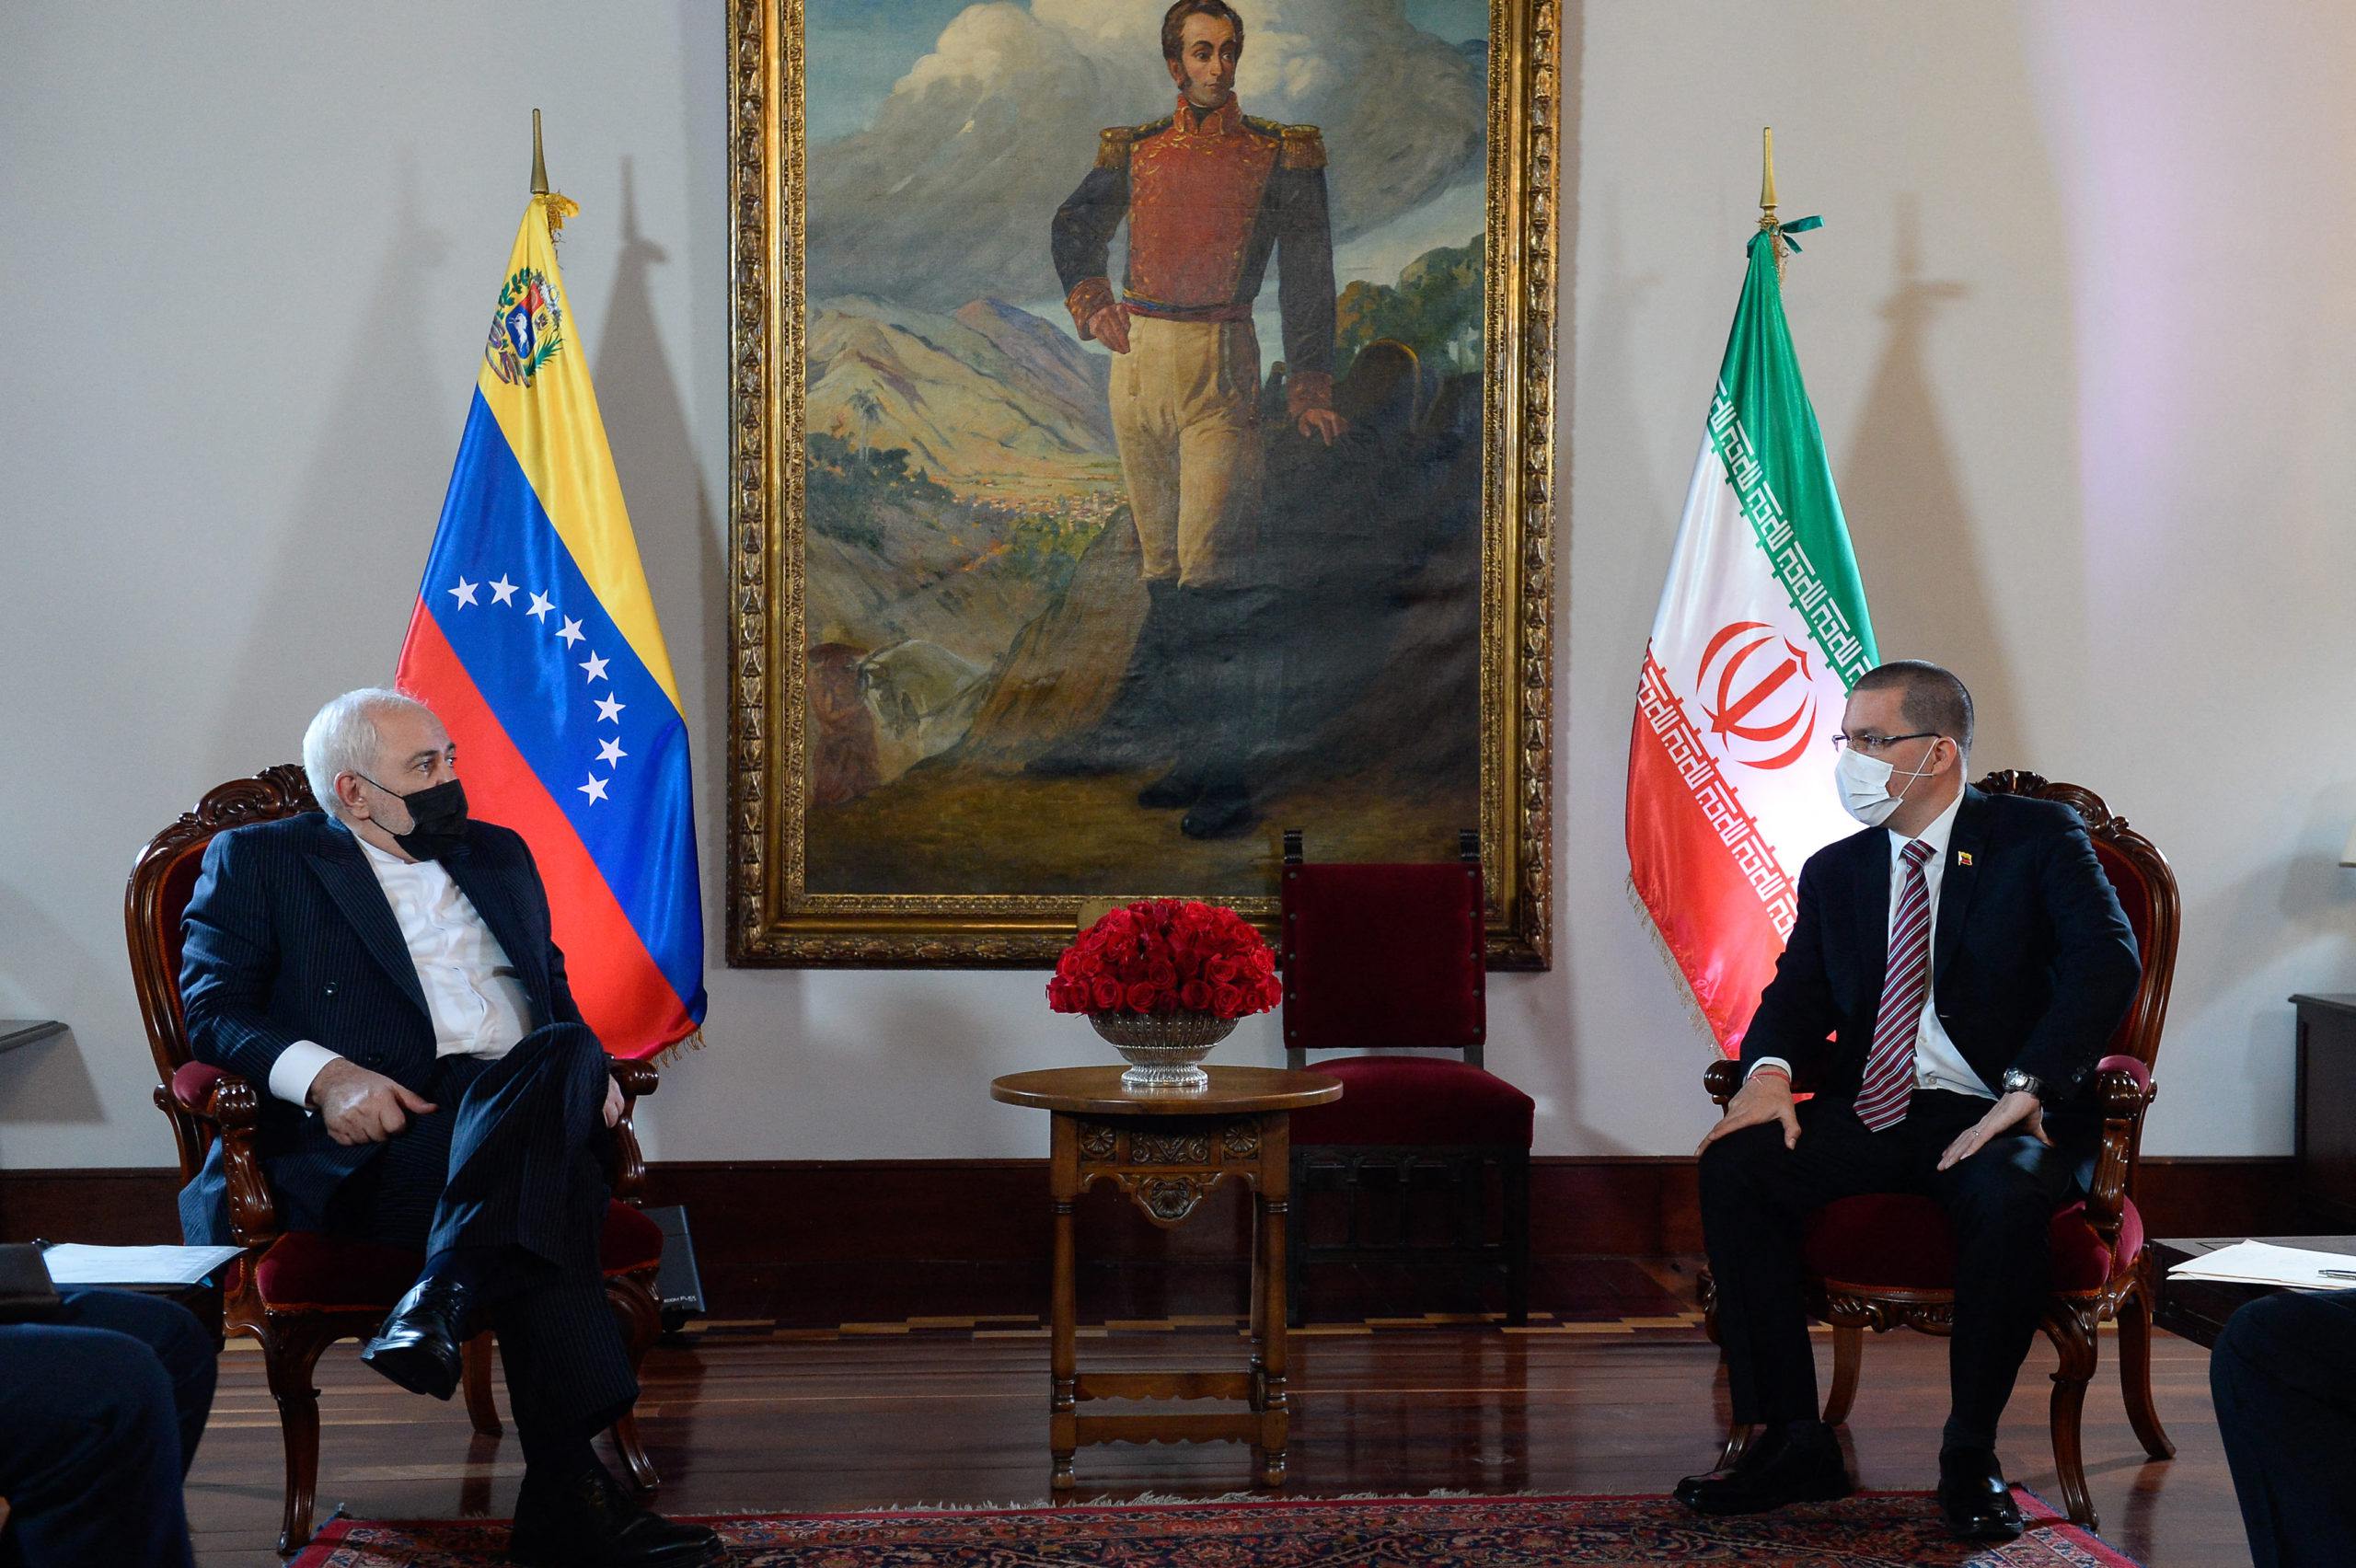 ifmat - Iran has infiltrated and corrupted Latin American politics